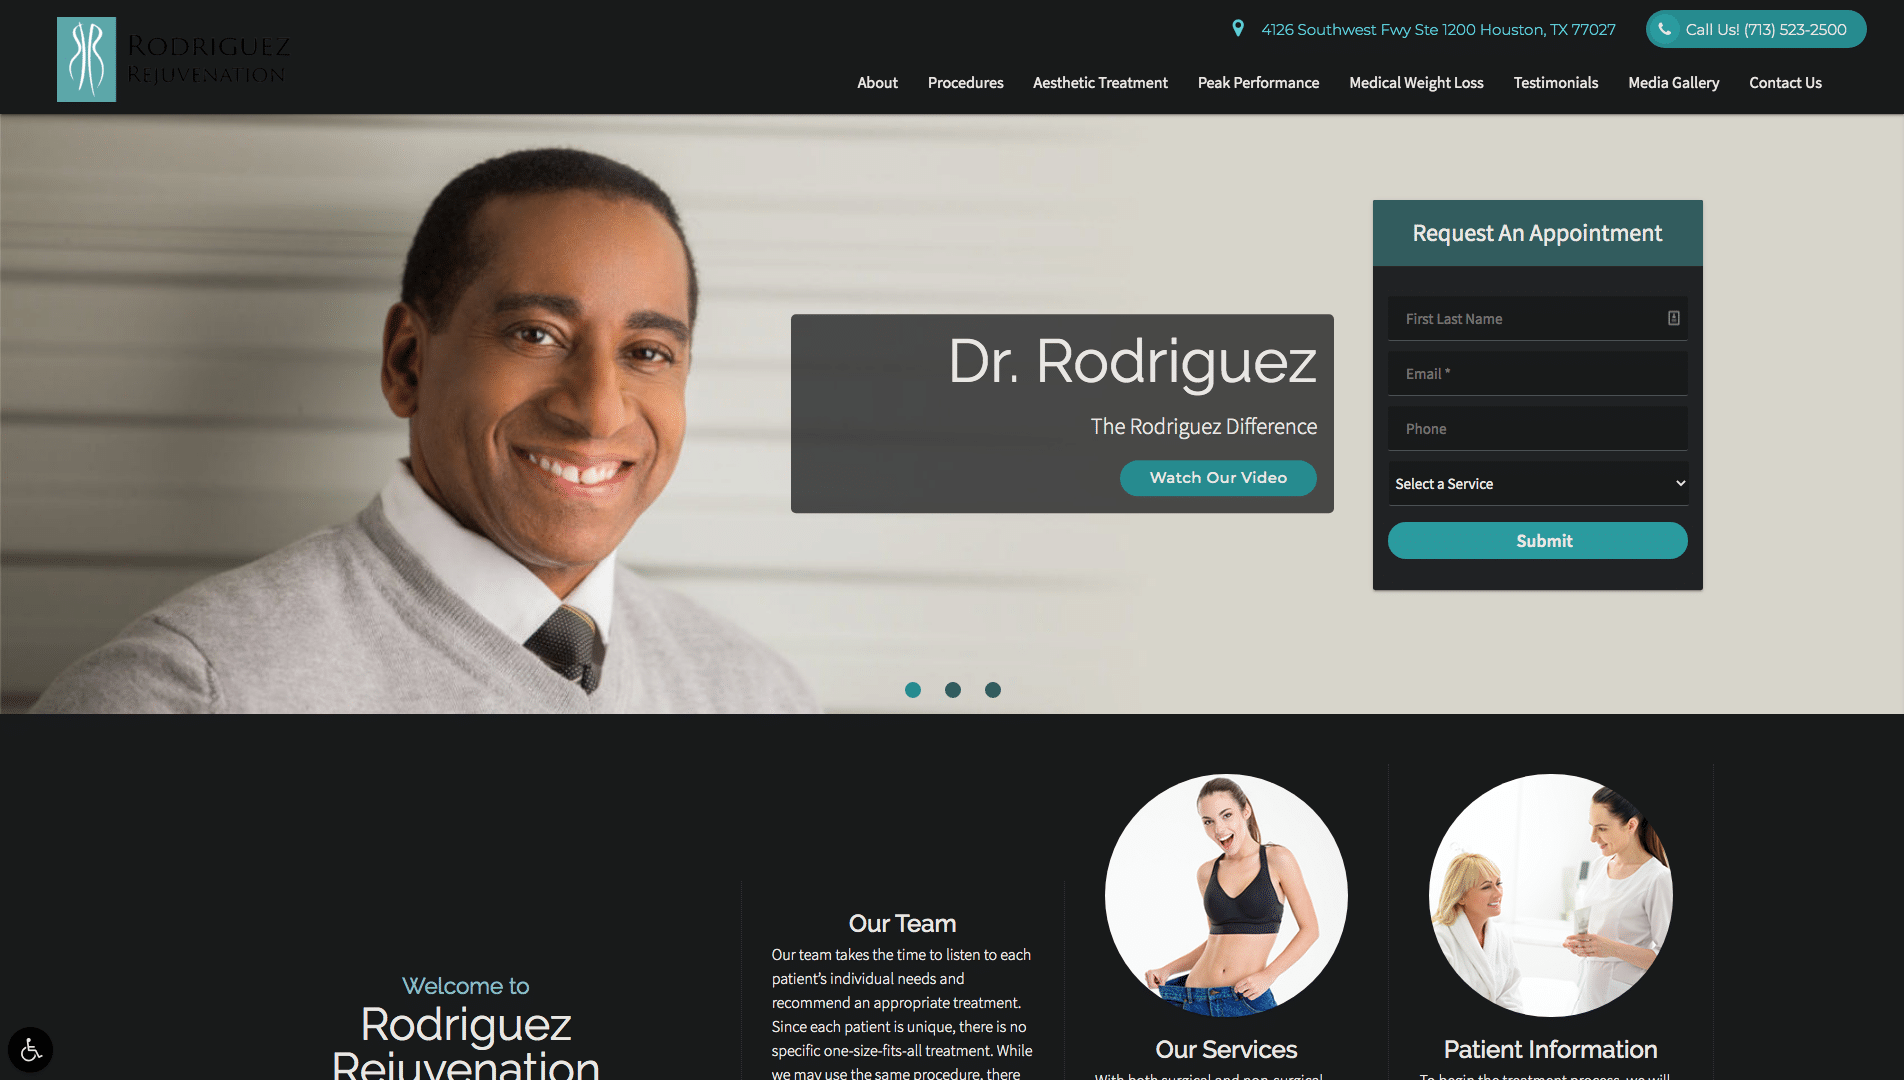 Rodriguez Rejuvenation Attracts the Right Patients Due to Their Brand Revamp